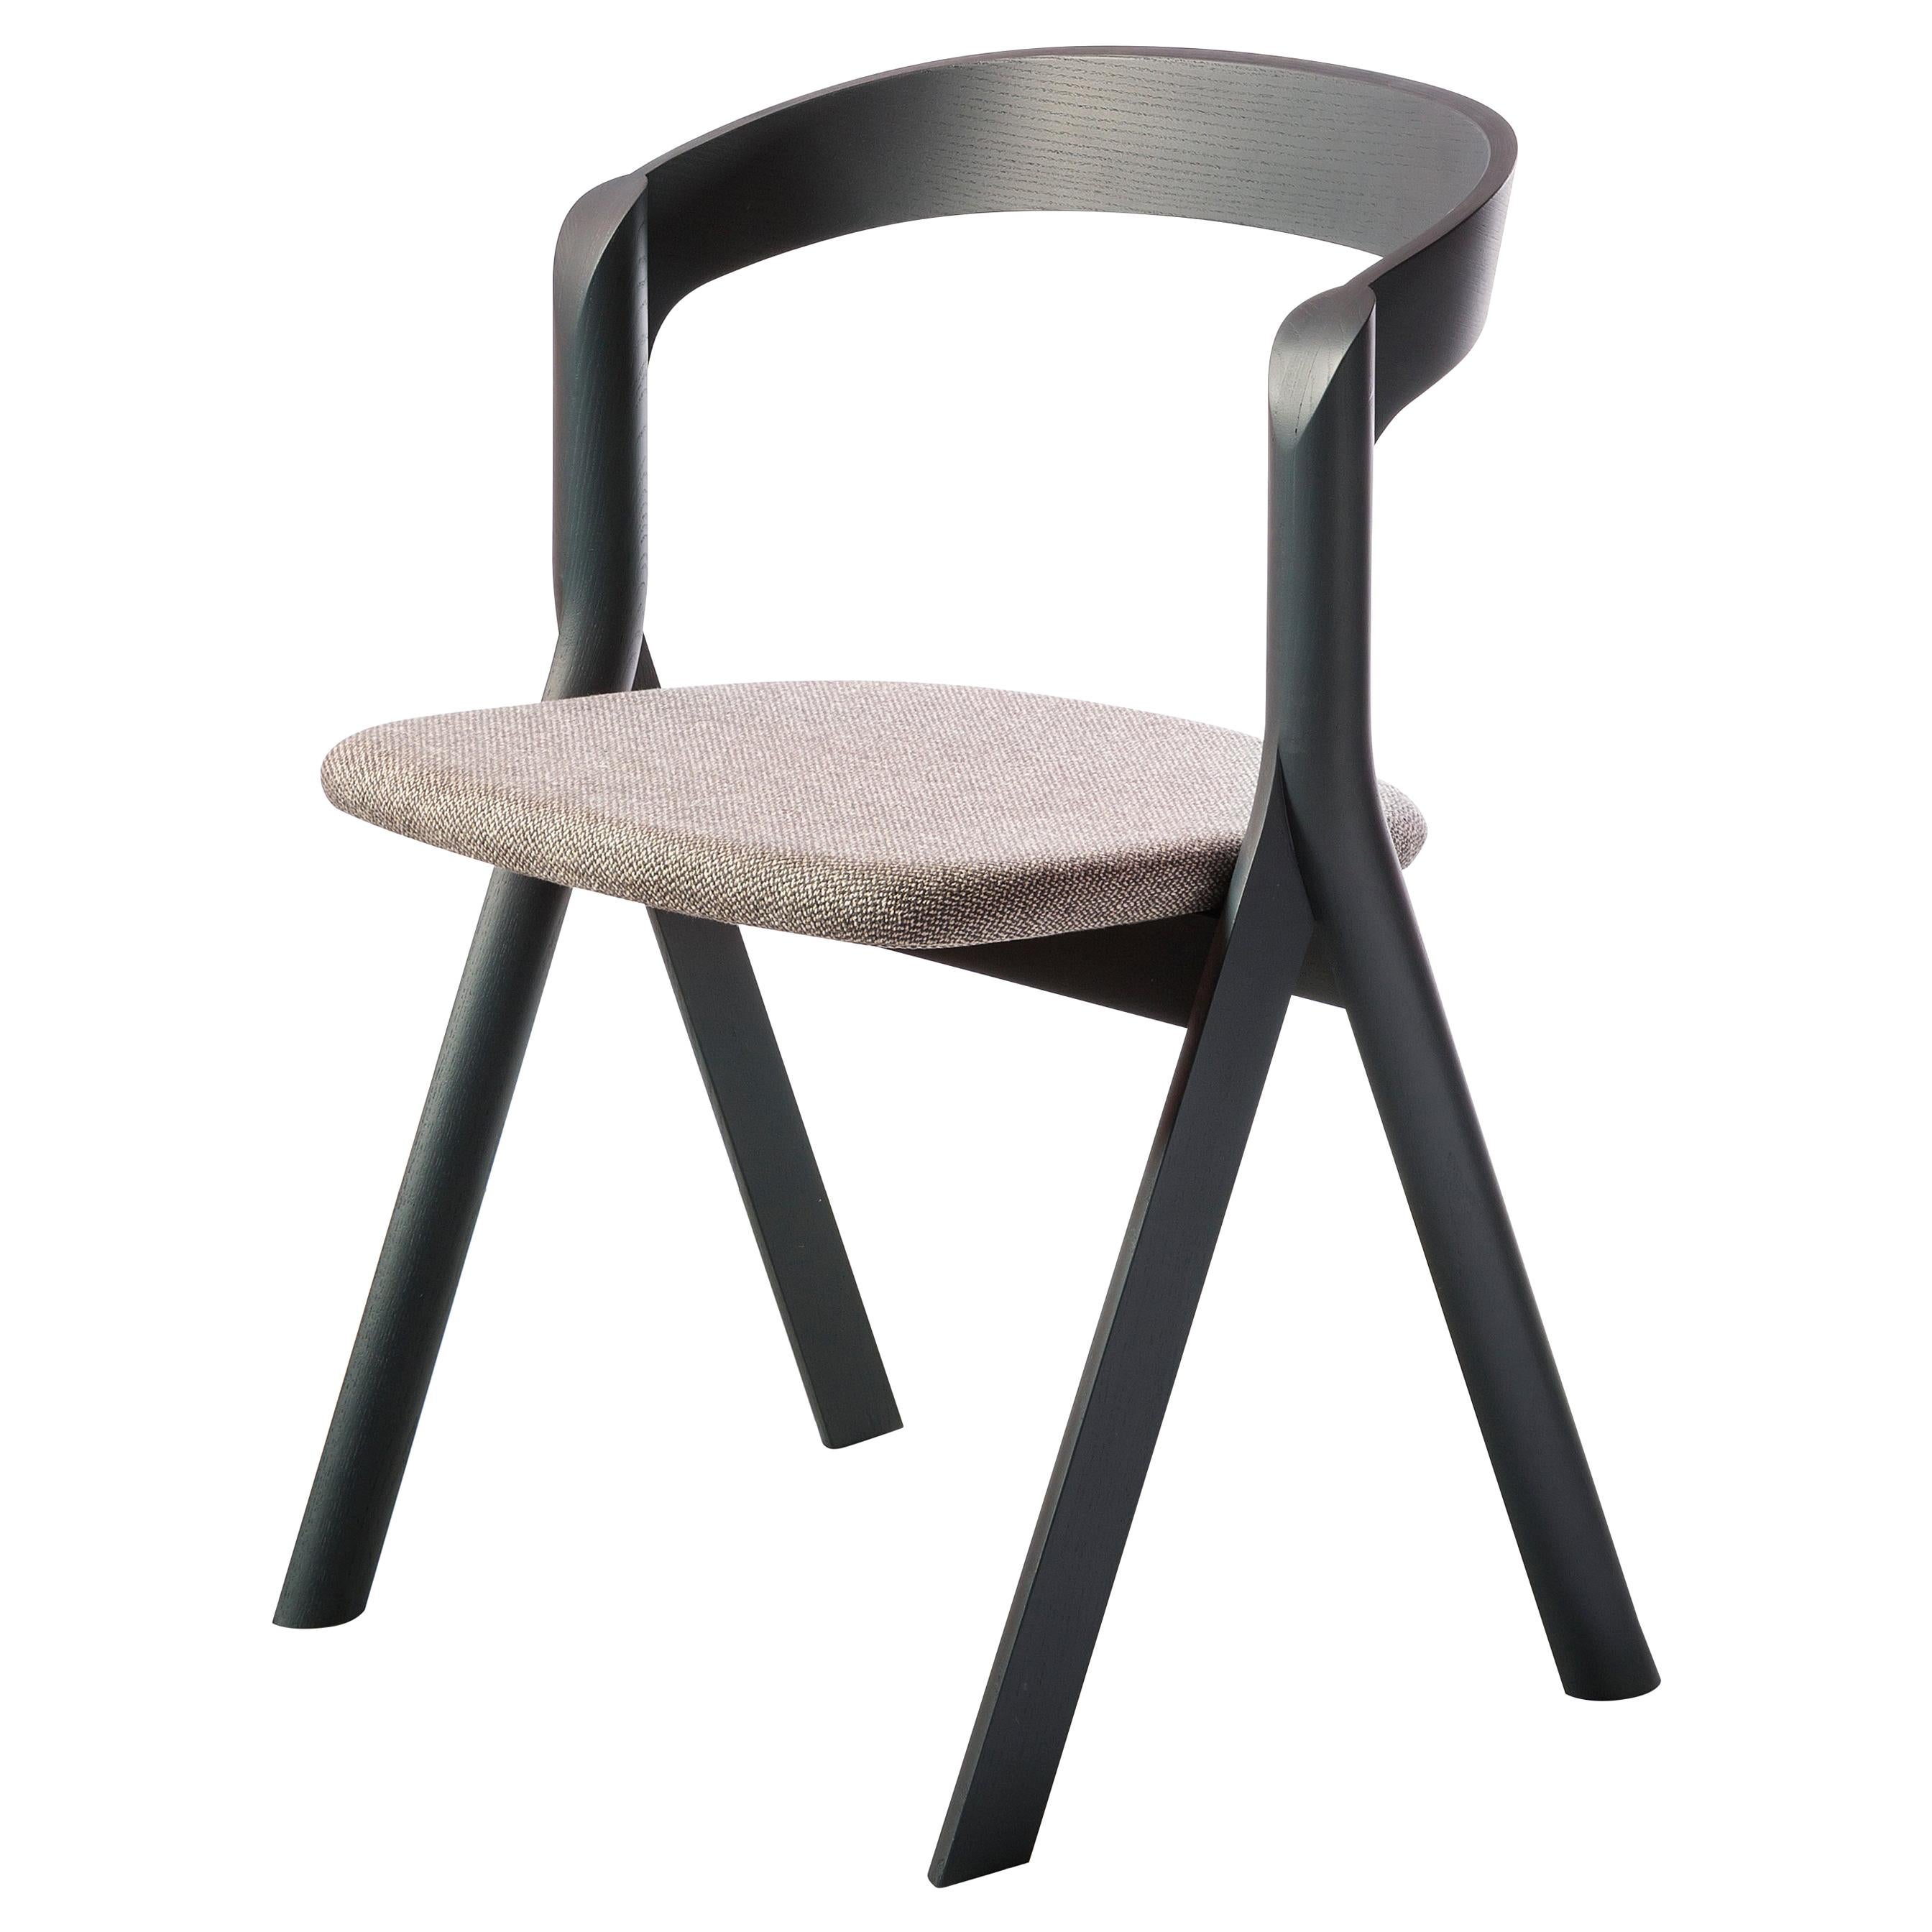 Diverge Chair in Wood Structure, Dove Gray Cushion, by Skrivo Design